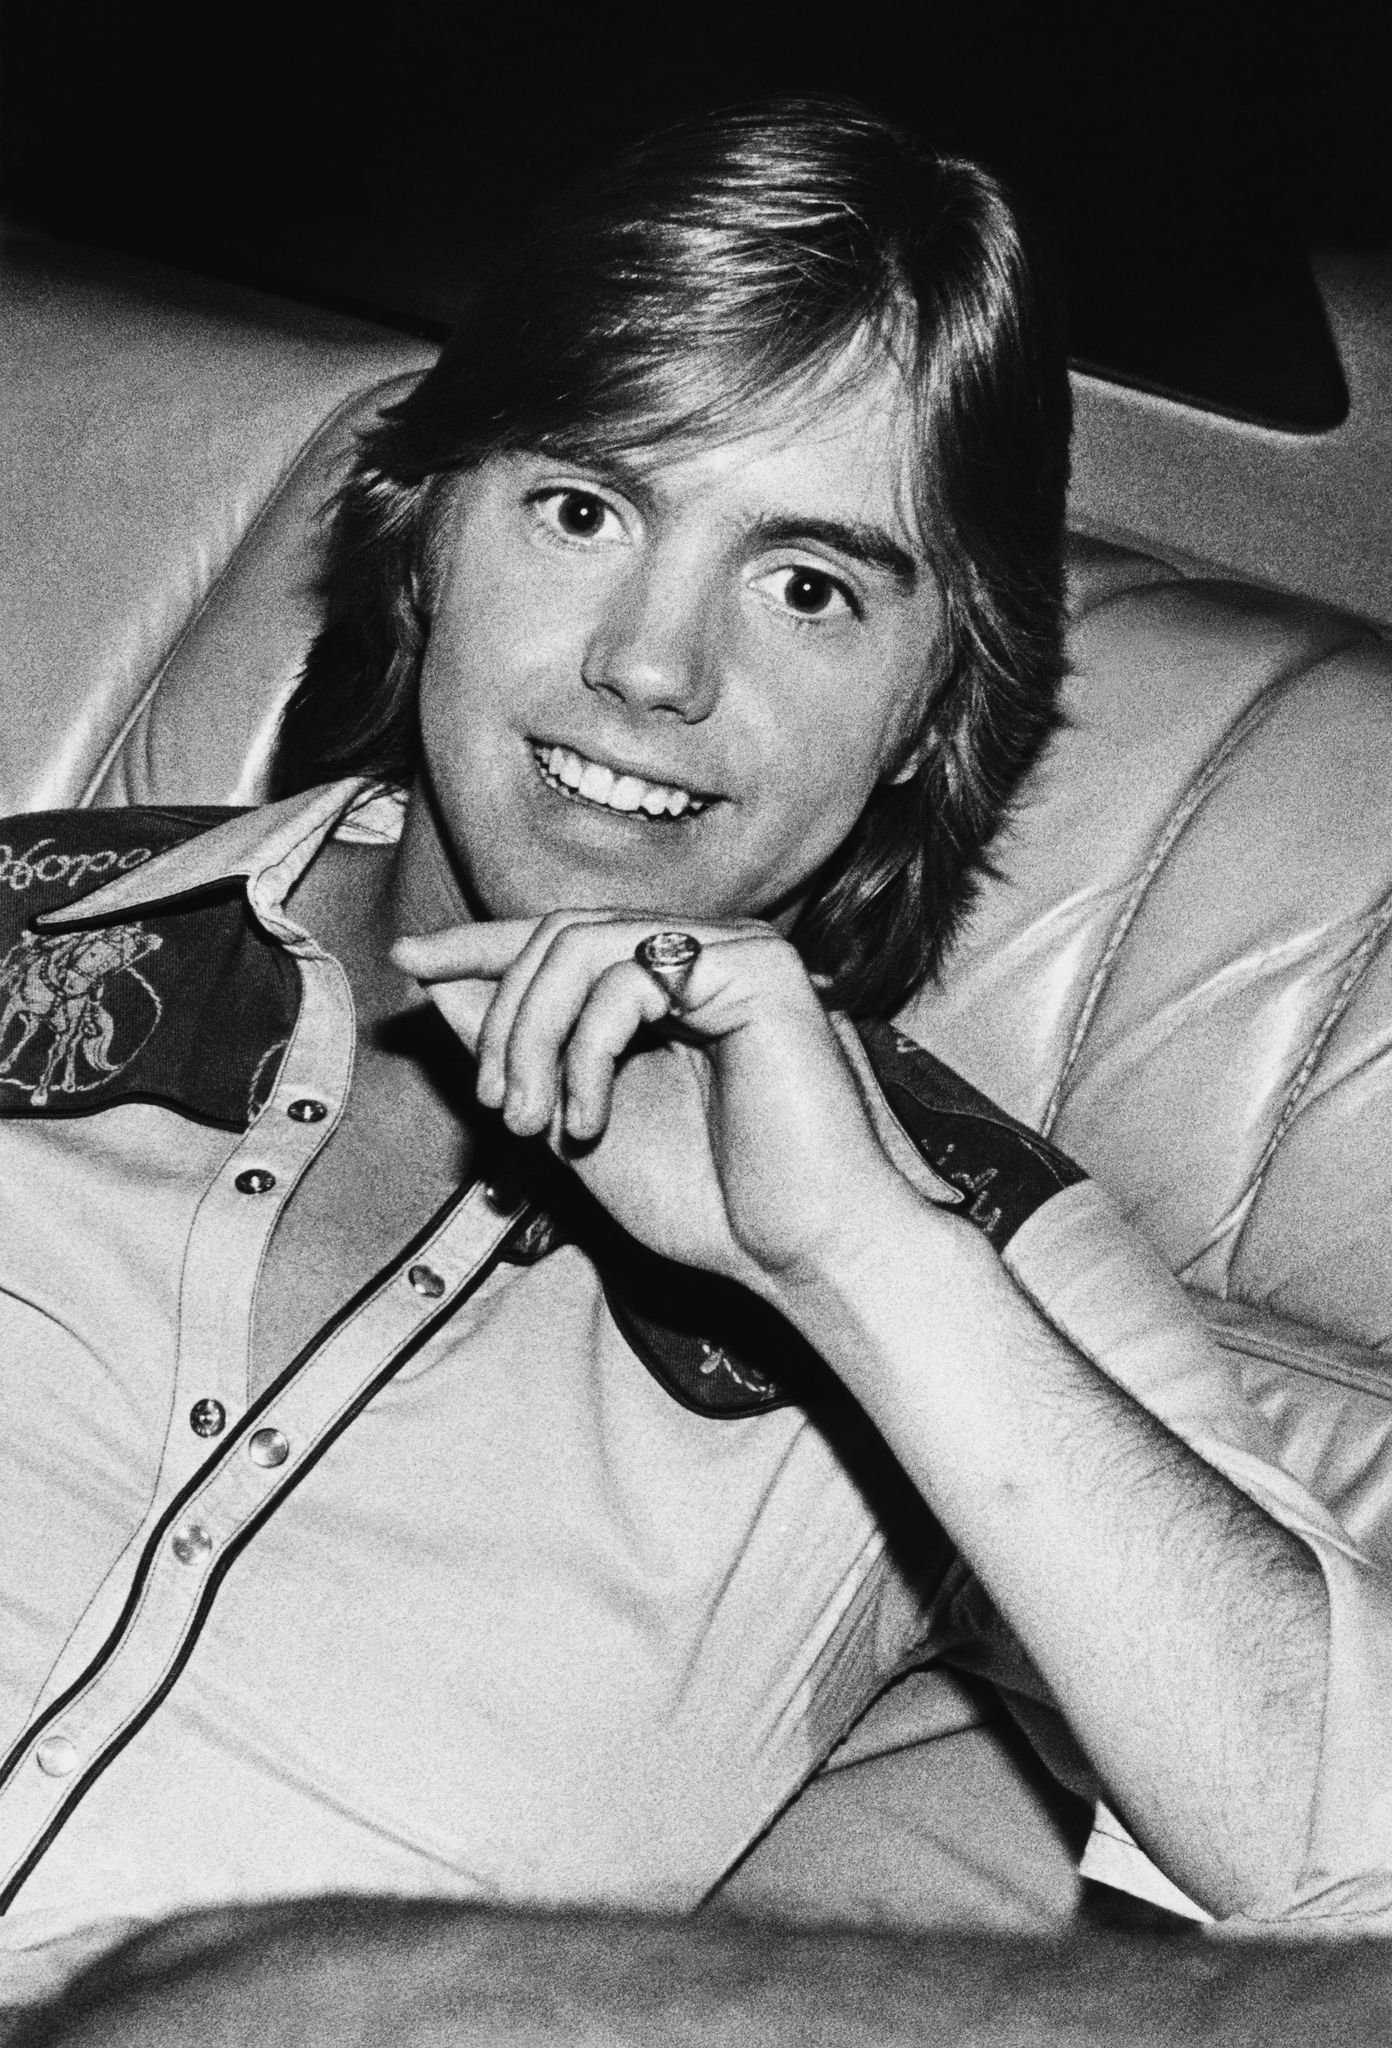 Teen idol singing sensation and son of actress Shirley Jones, Shaun Cassidy | Getty Images